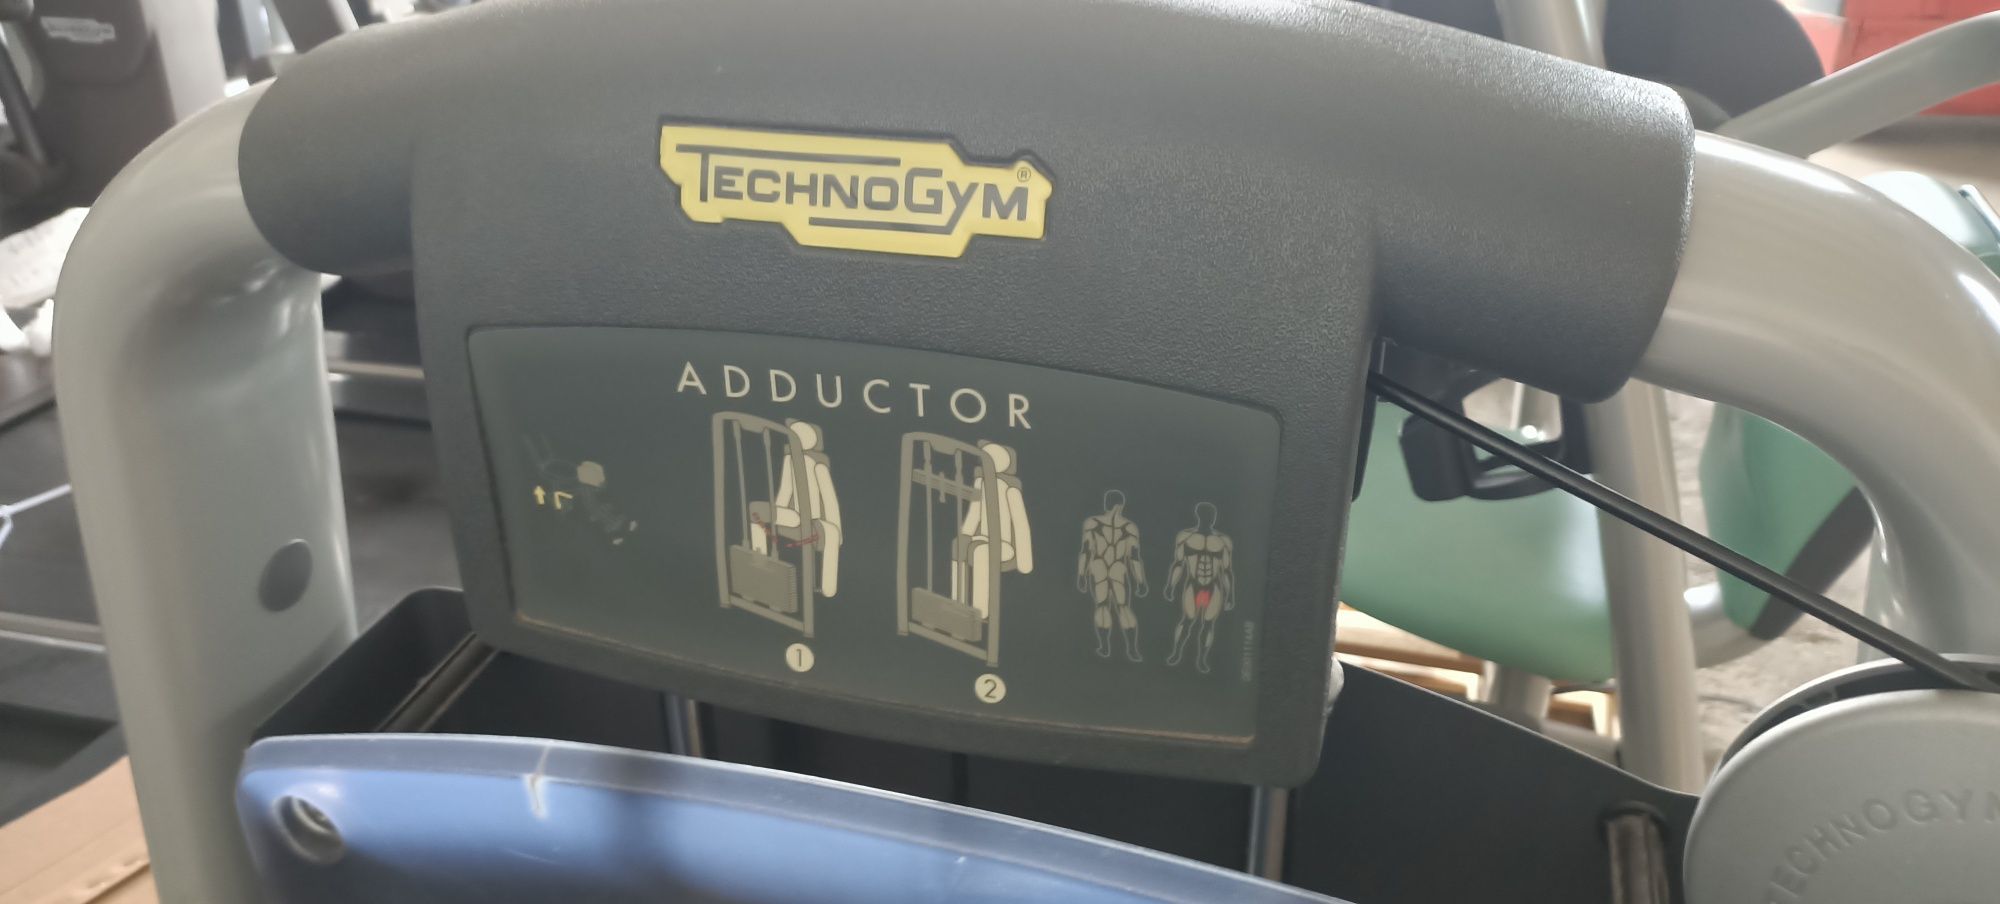 2 x Technogym selection Adductor i abductor